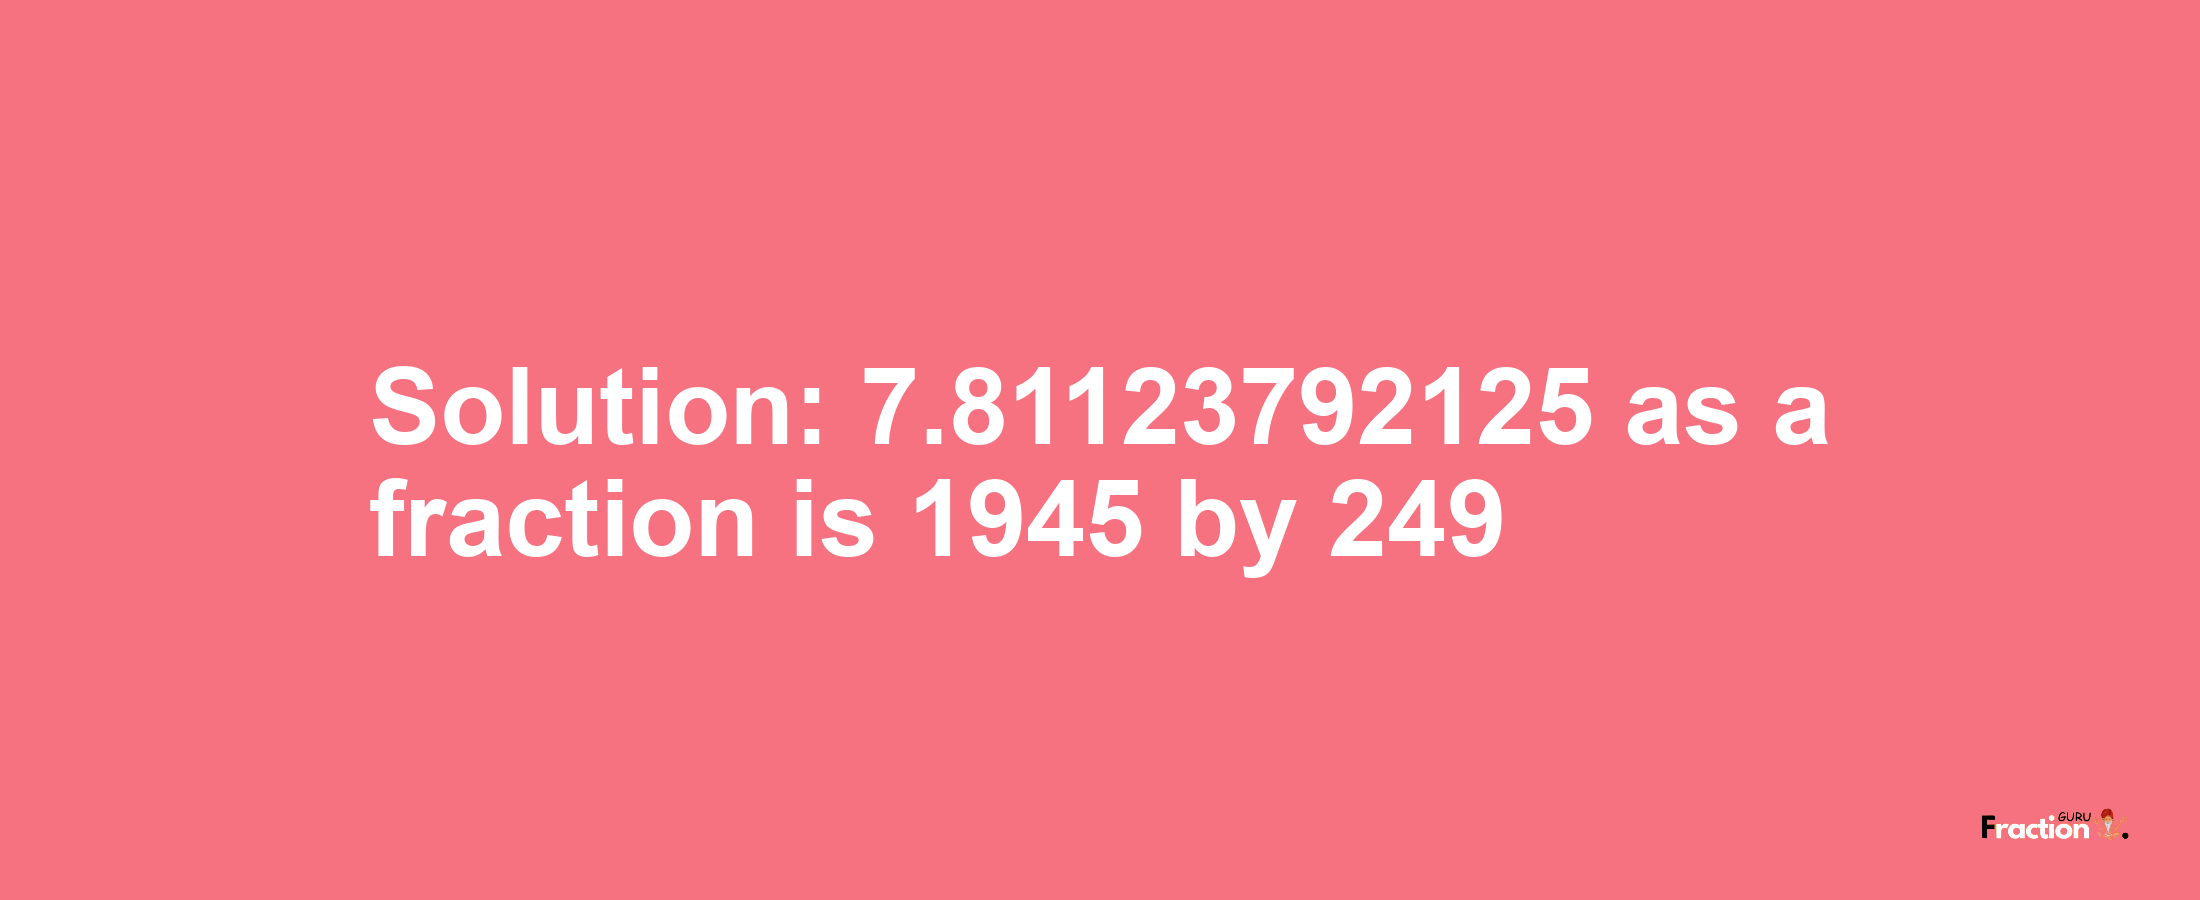 Solution:7.81123792125 as a fraction is 1945/249